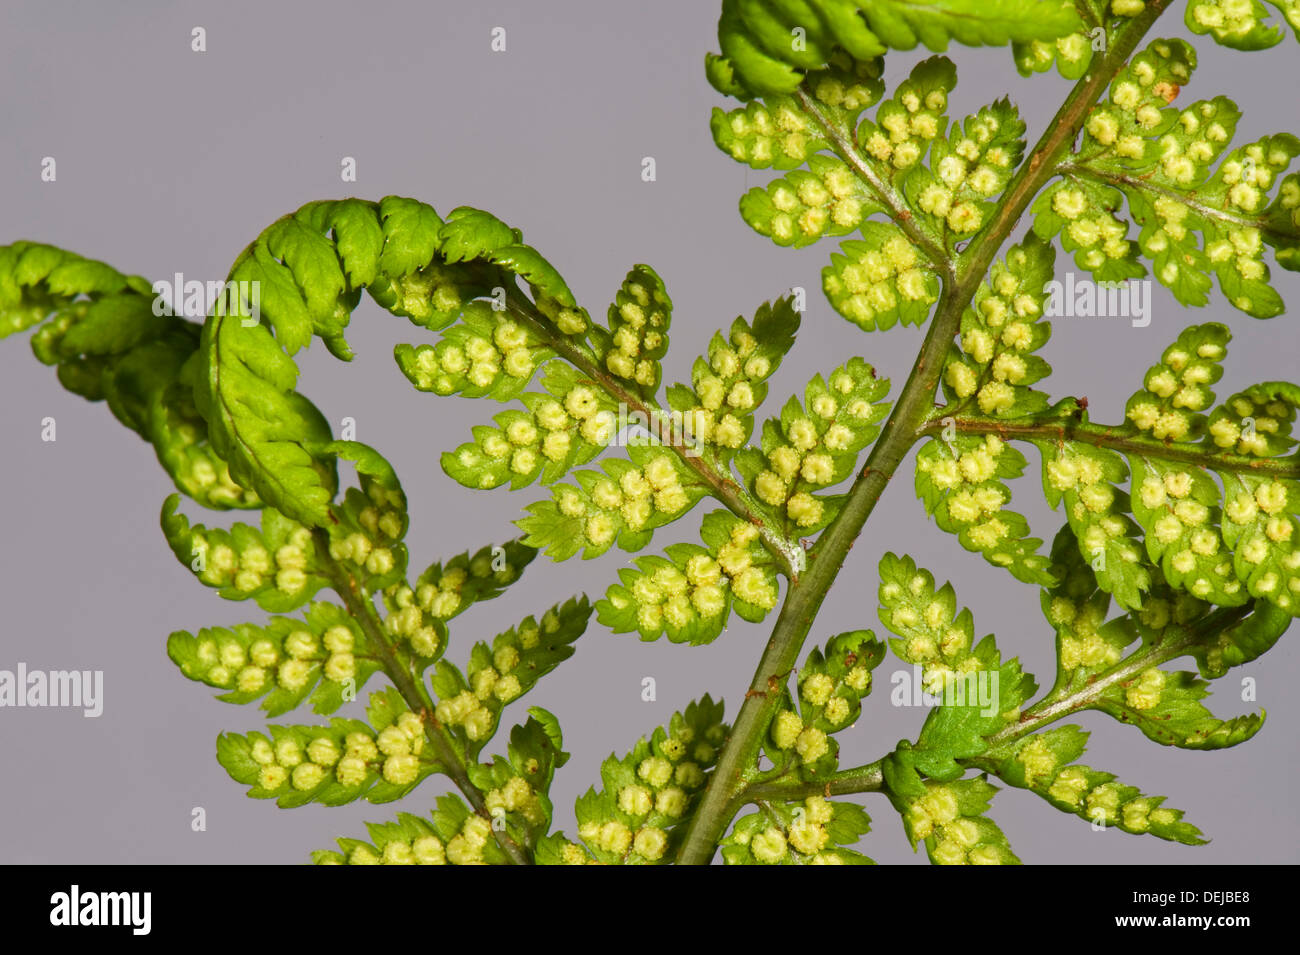 Sori developing on the underside of the frond or blade of a male fern, Dryopteris filix-mas, Stock Photo